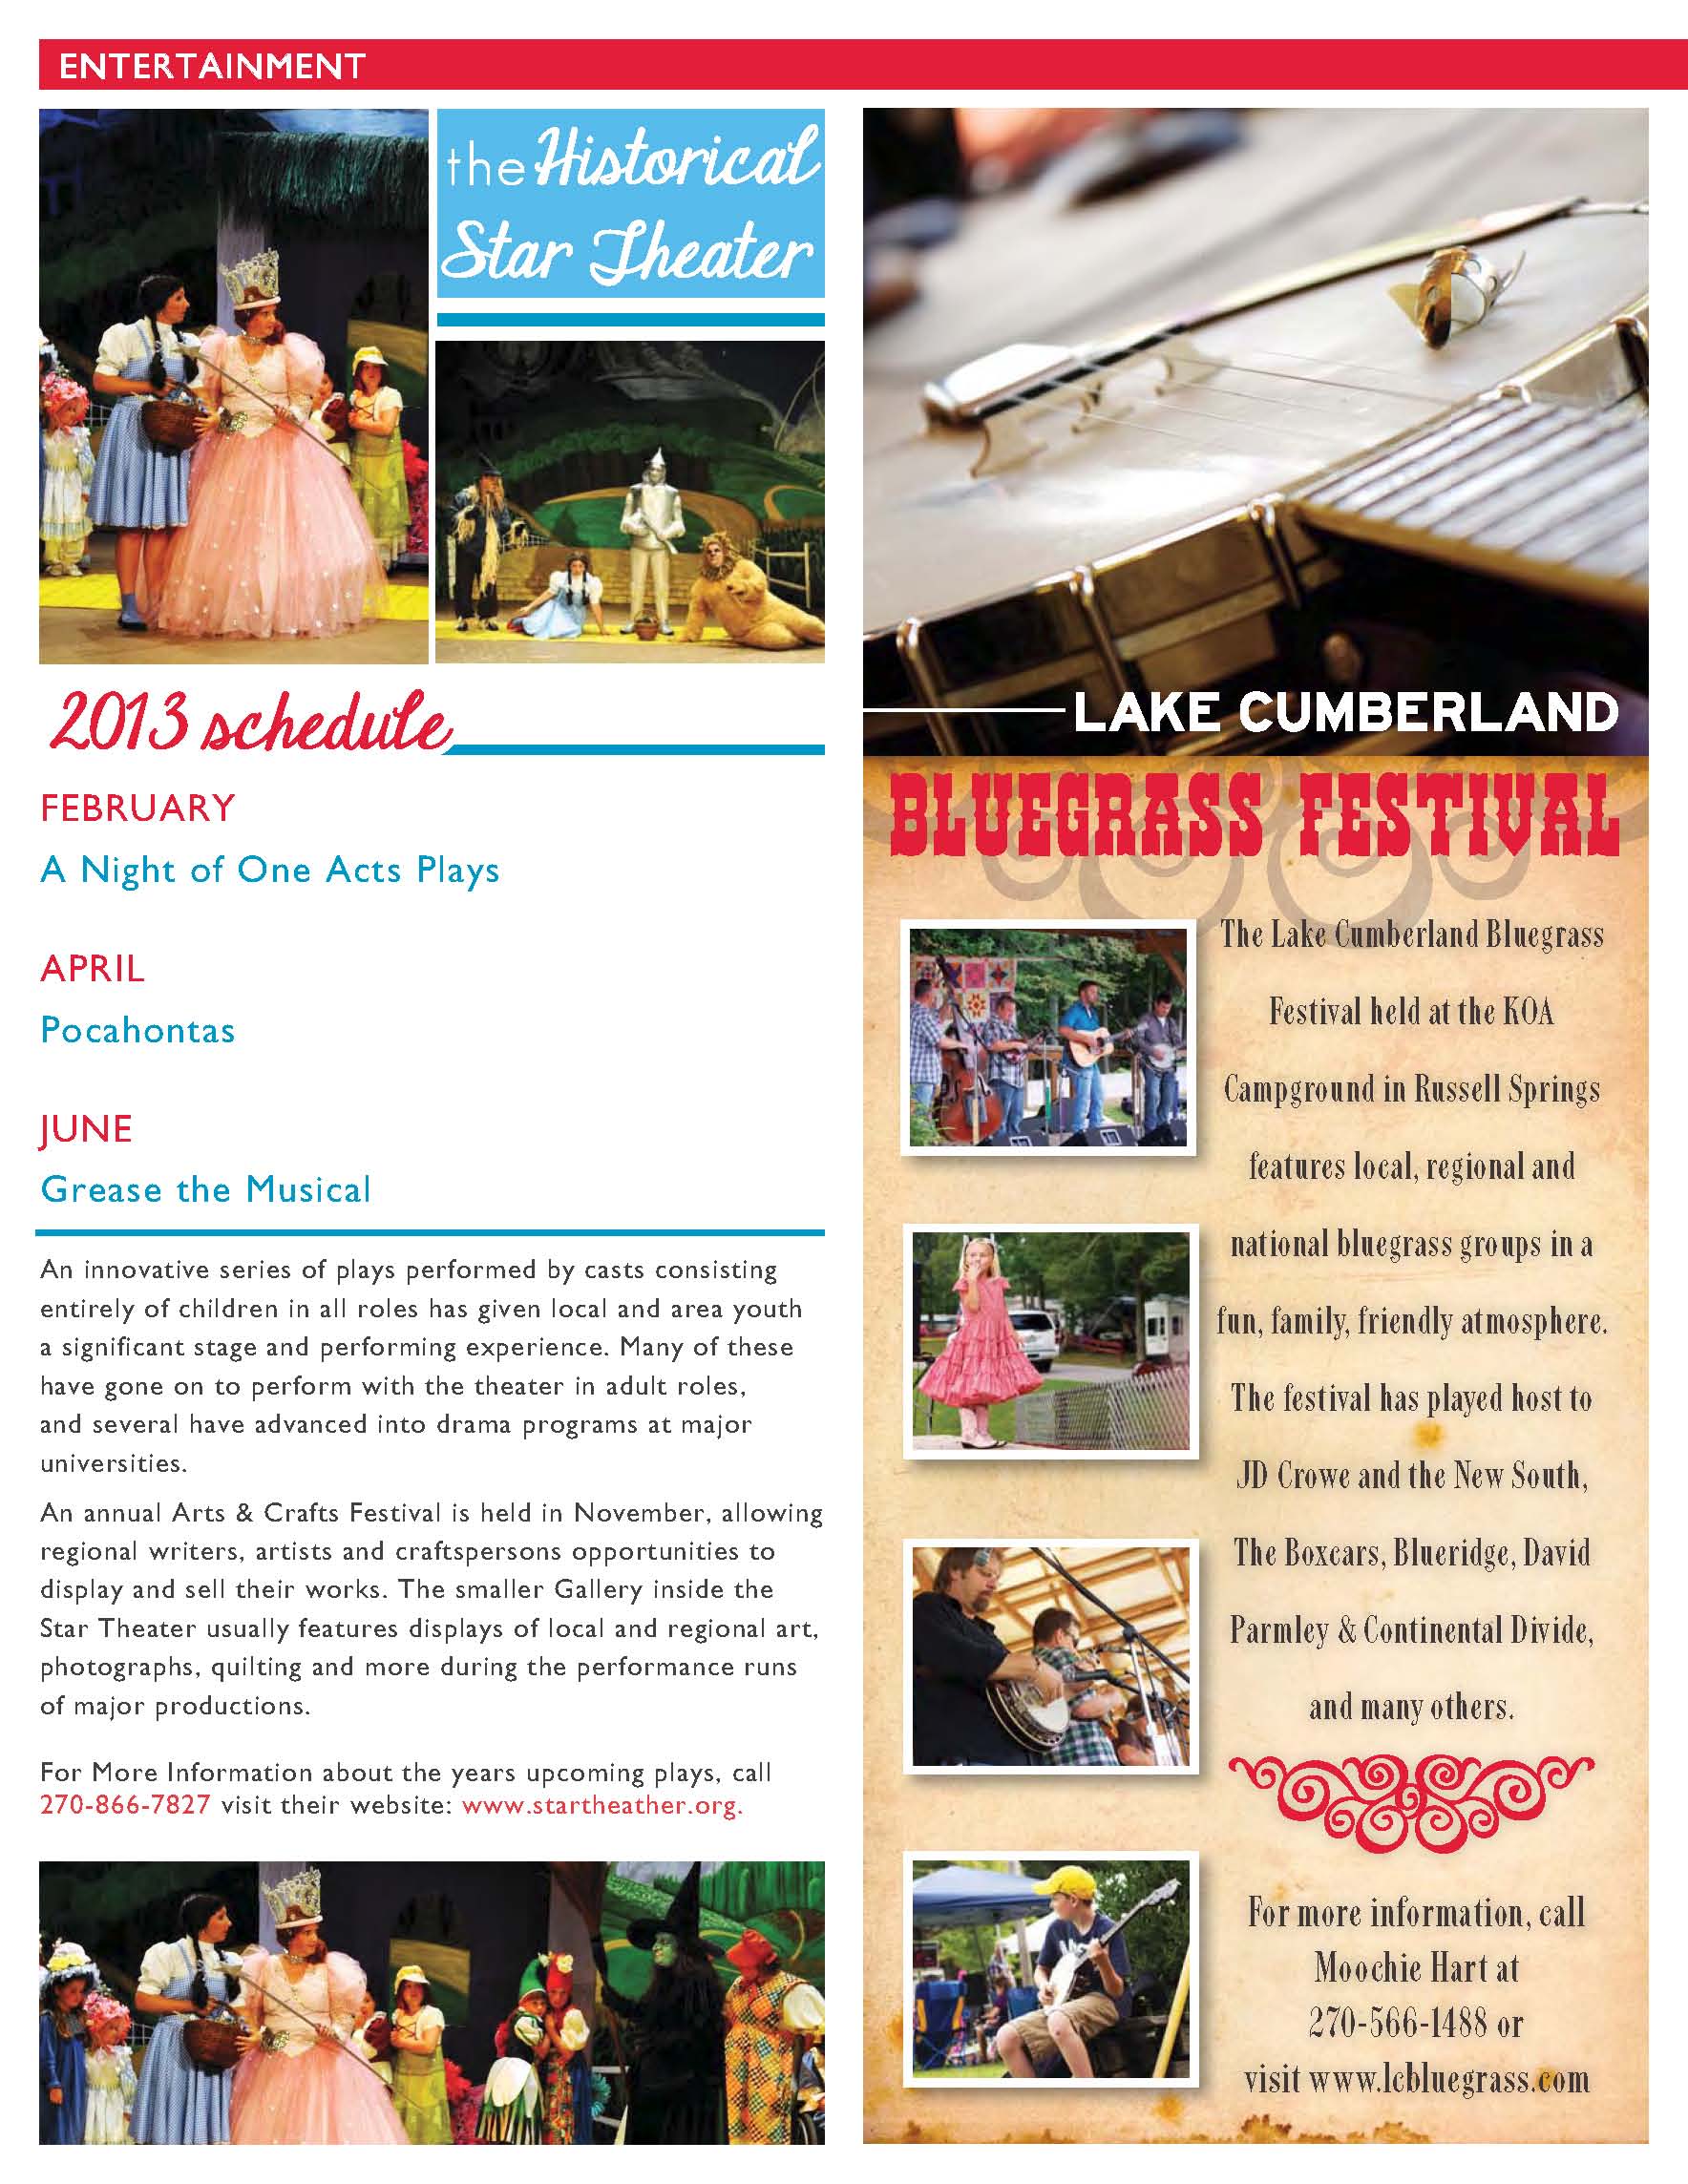 visitor-guide2013-web_Page_14.jpg